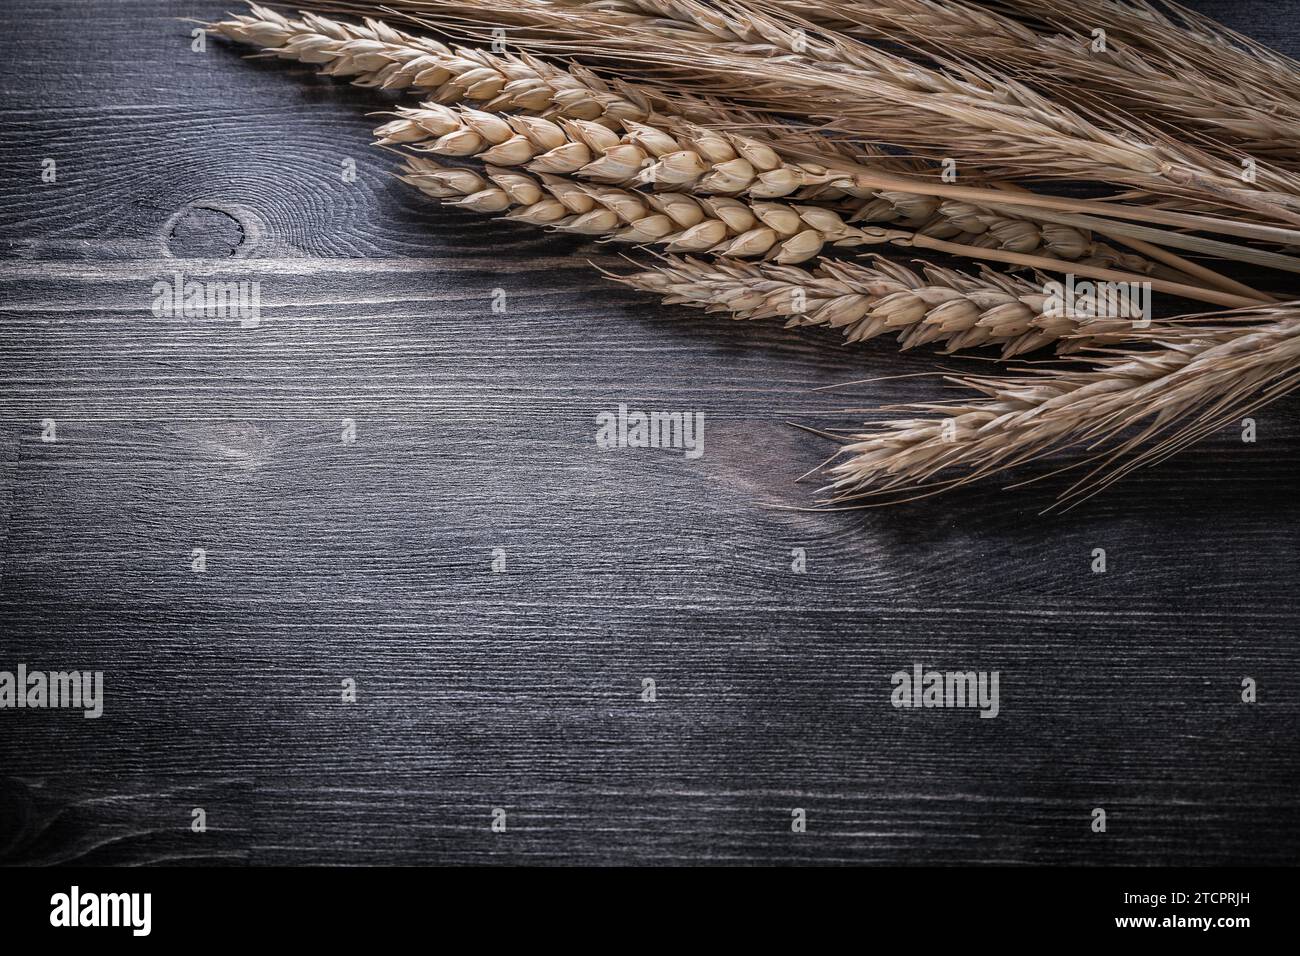 Golden wheat rye ears Food and beverage concept Stock Photo